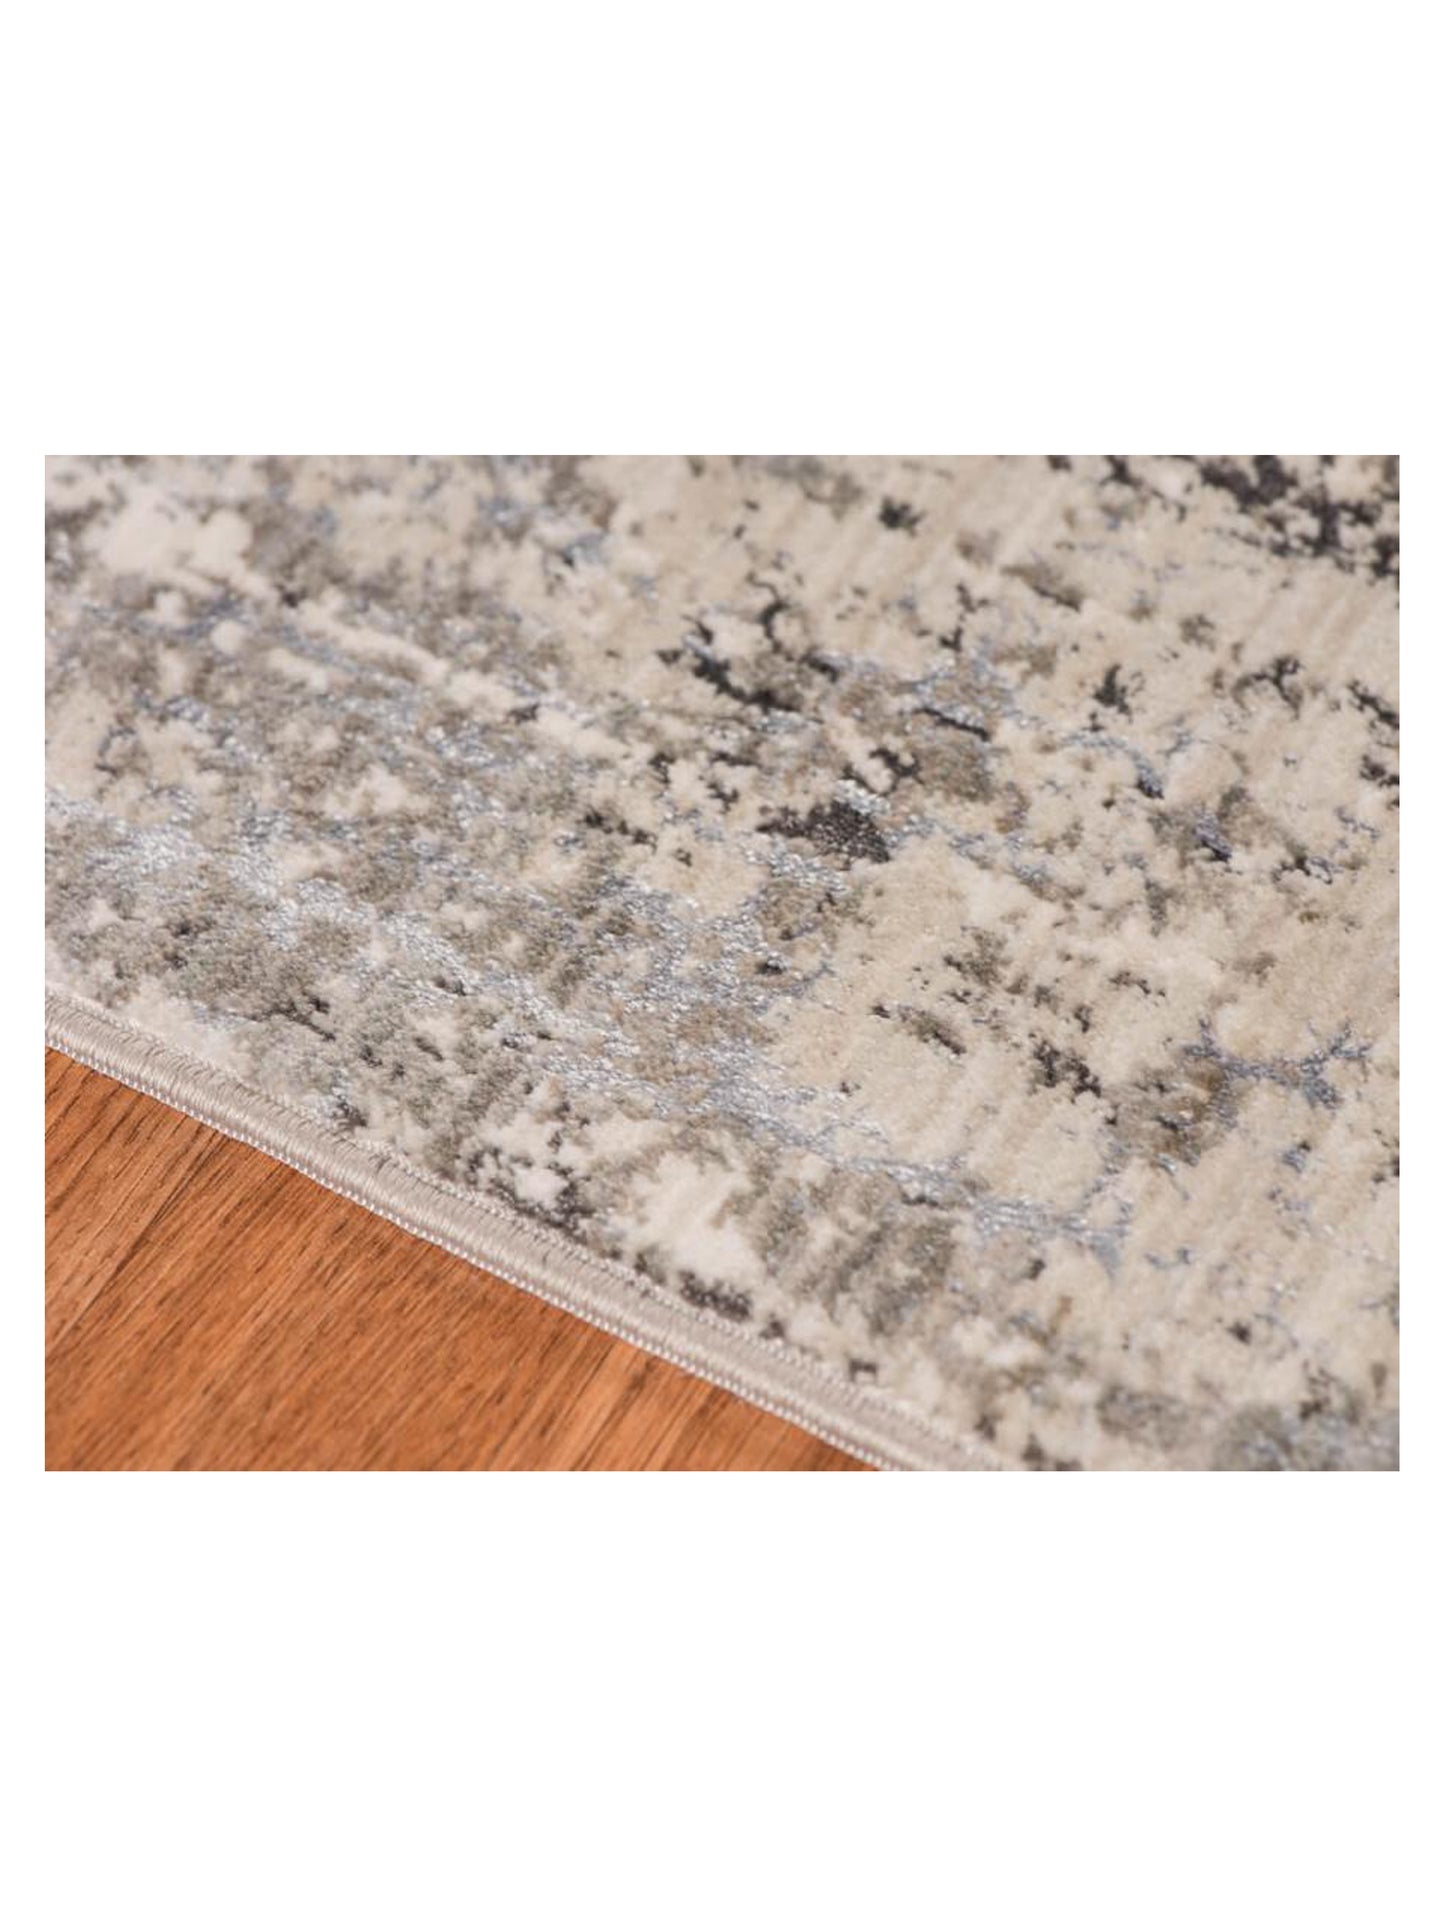 Limited Rosy RO-519 SILVER  Transitional Machinemade Rug